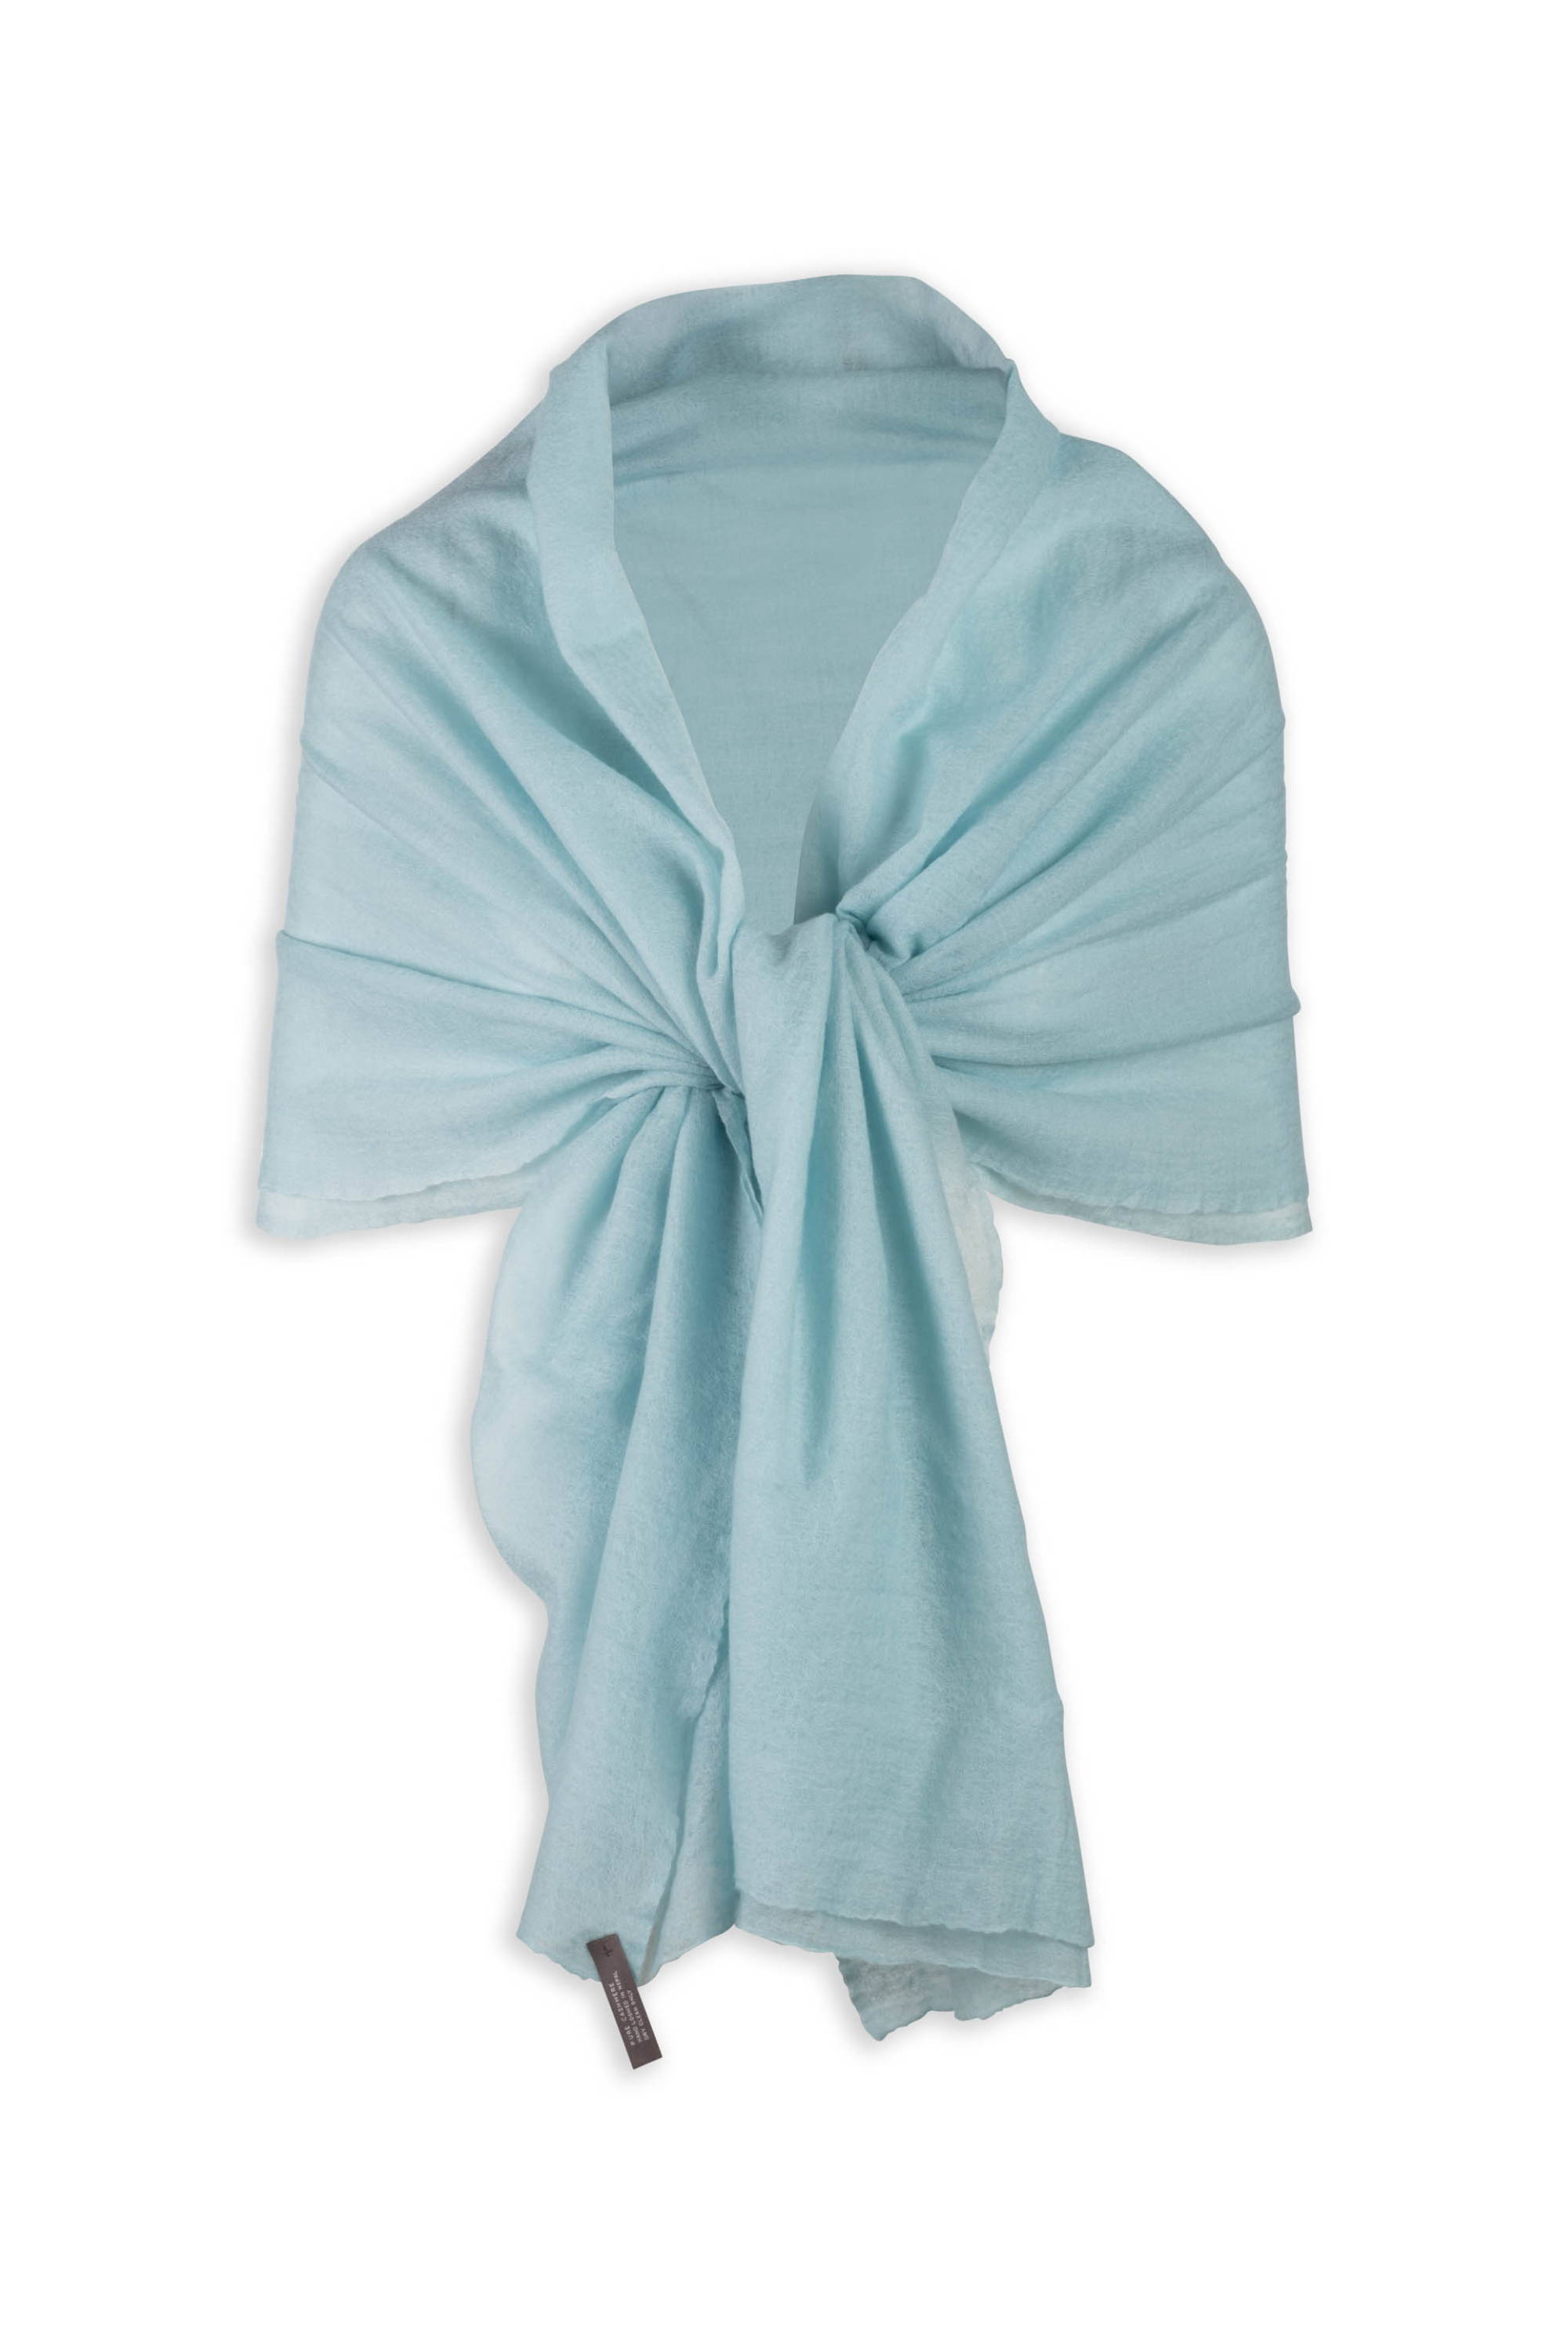 blue cashmere wrap scarf by Ala von Auersperg for bridesmaids gifts